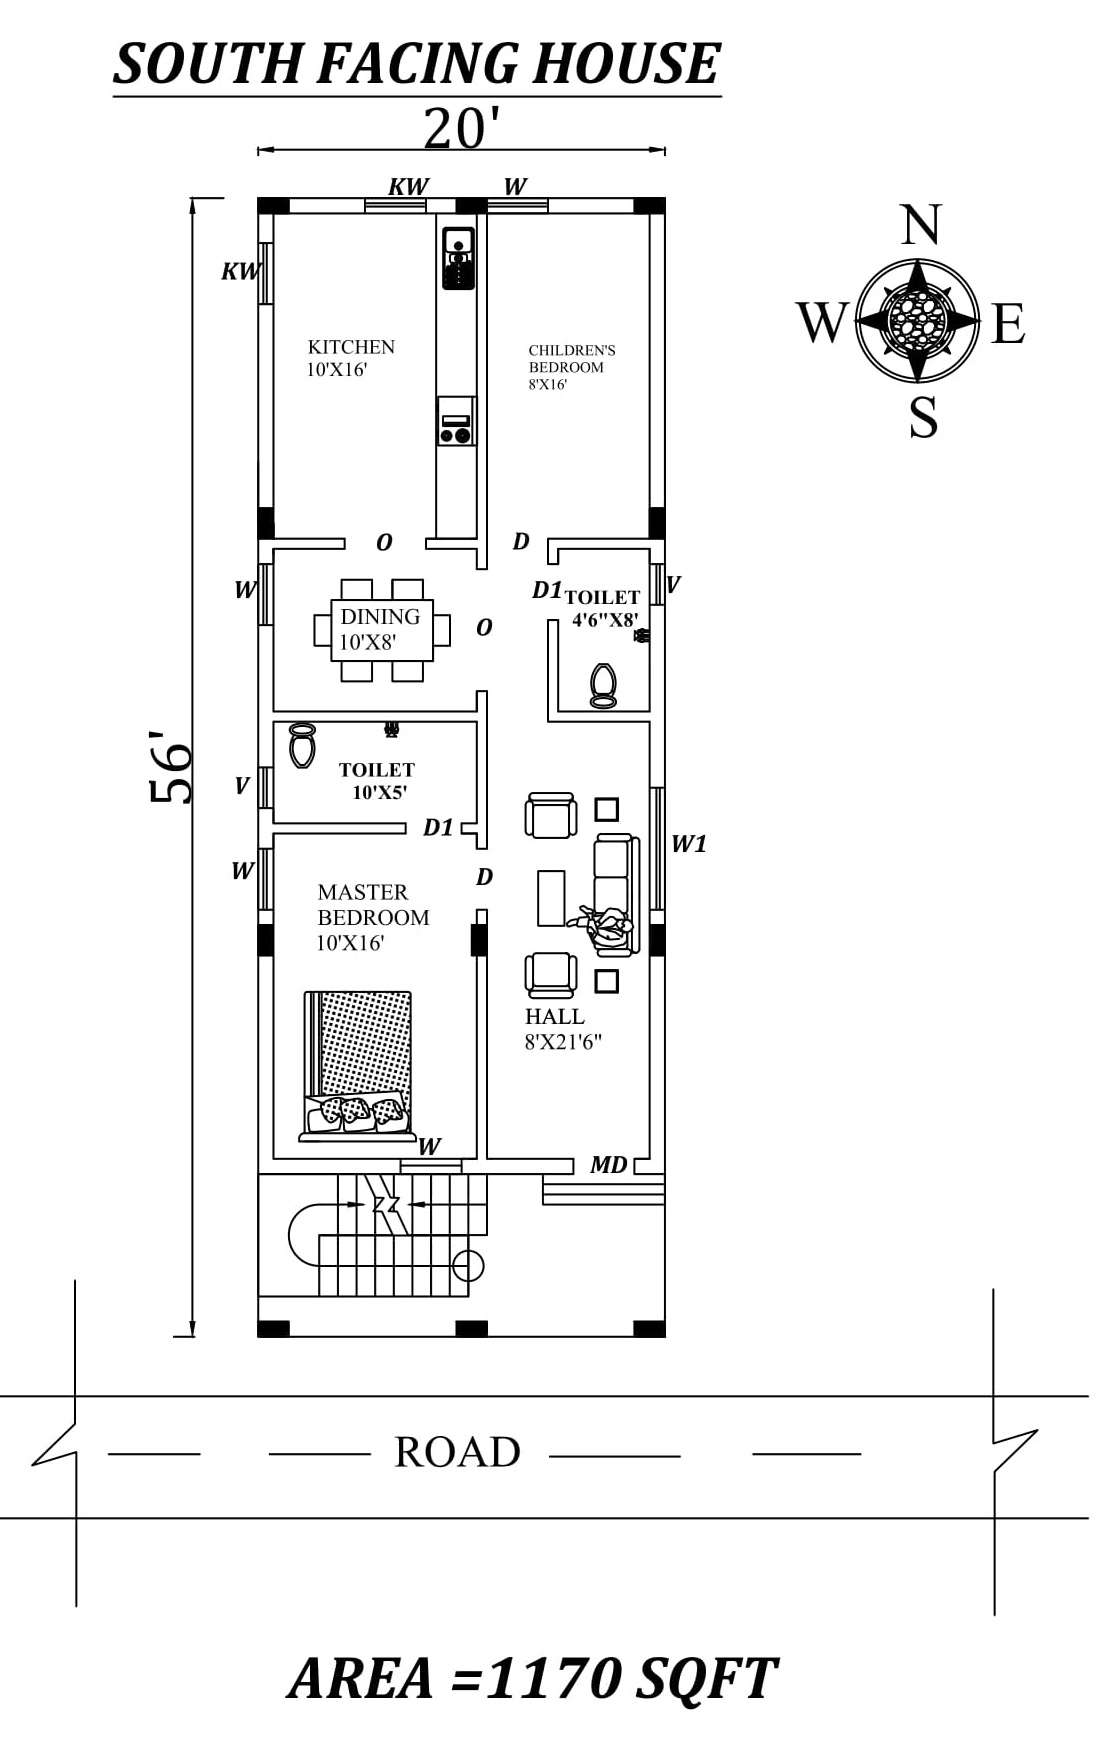 20'x56' 2bhk South facing First floor House Plan As Per